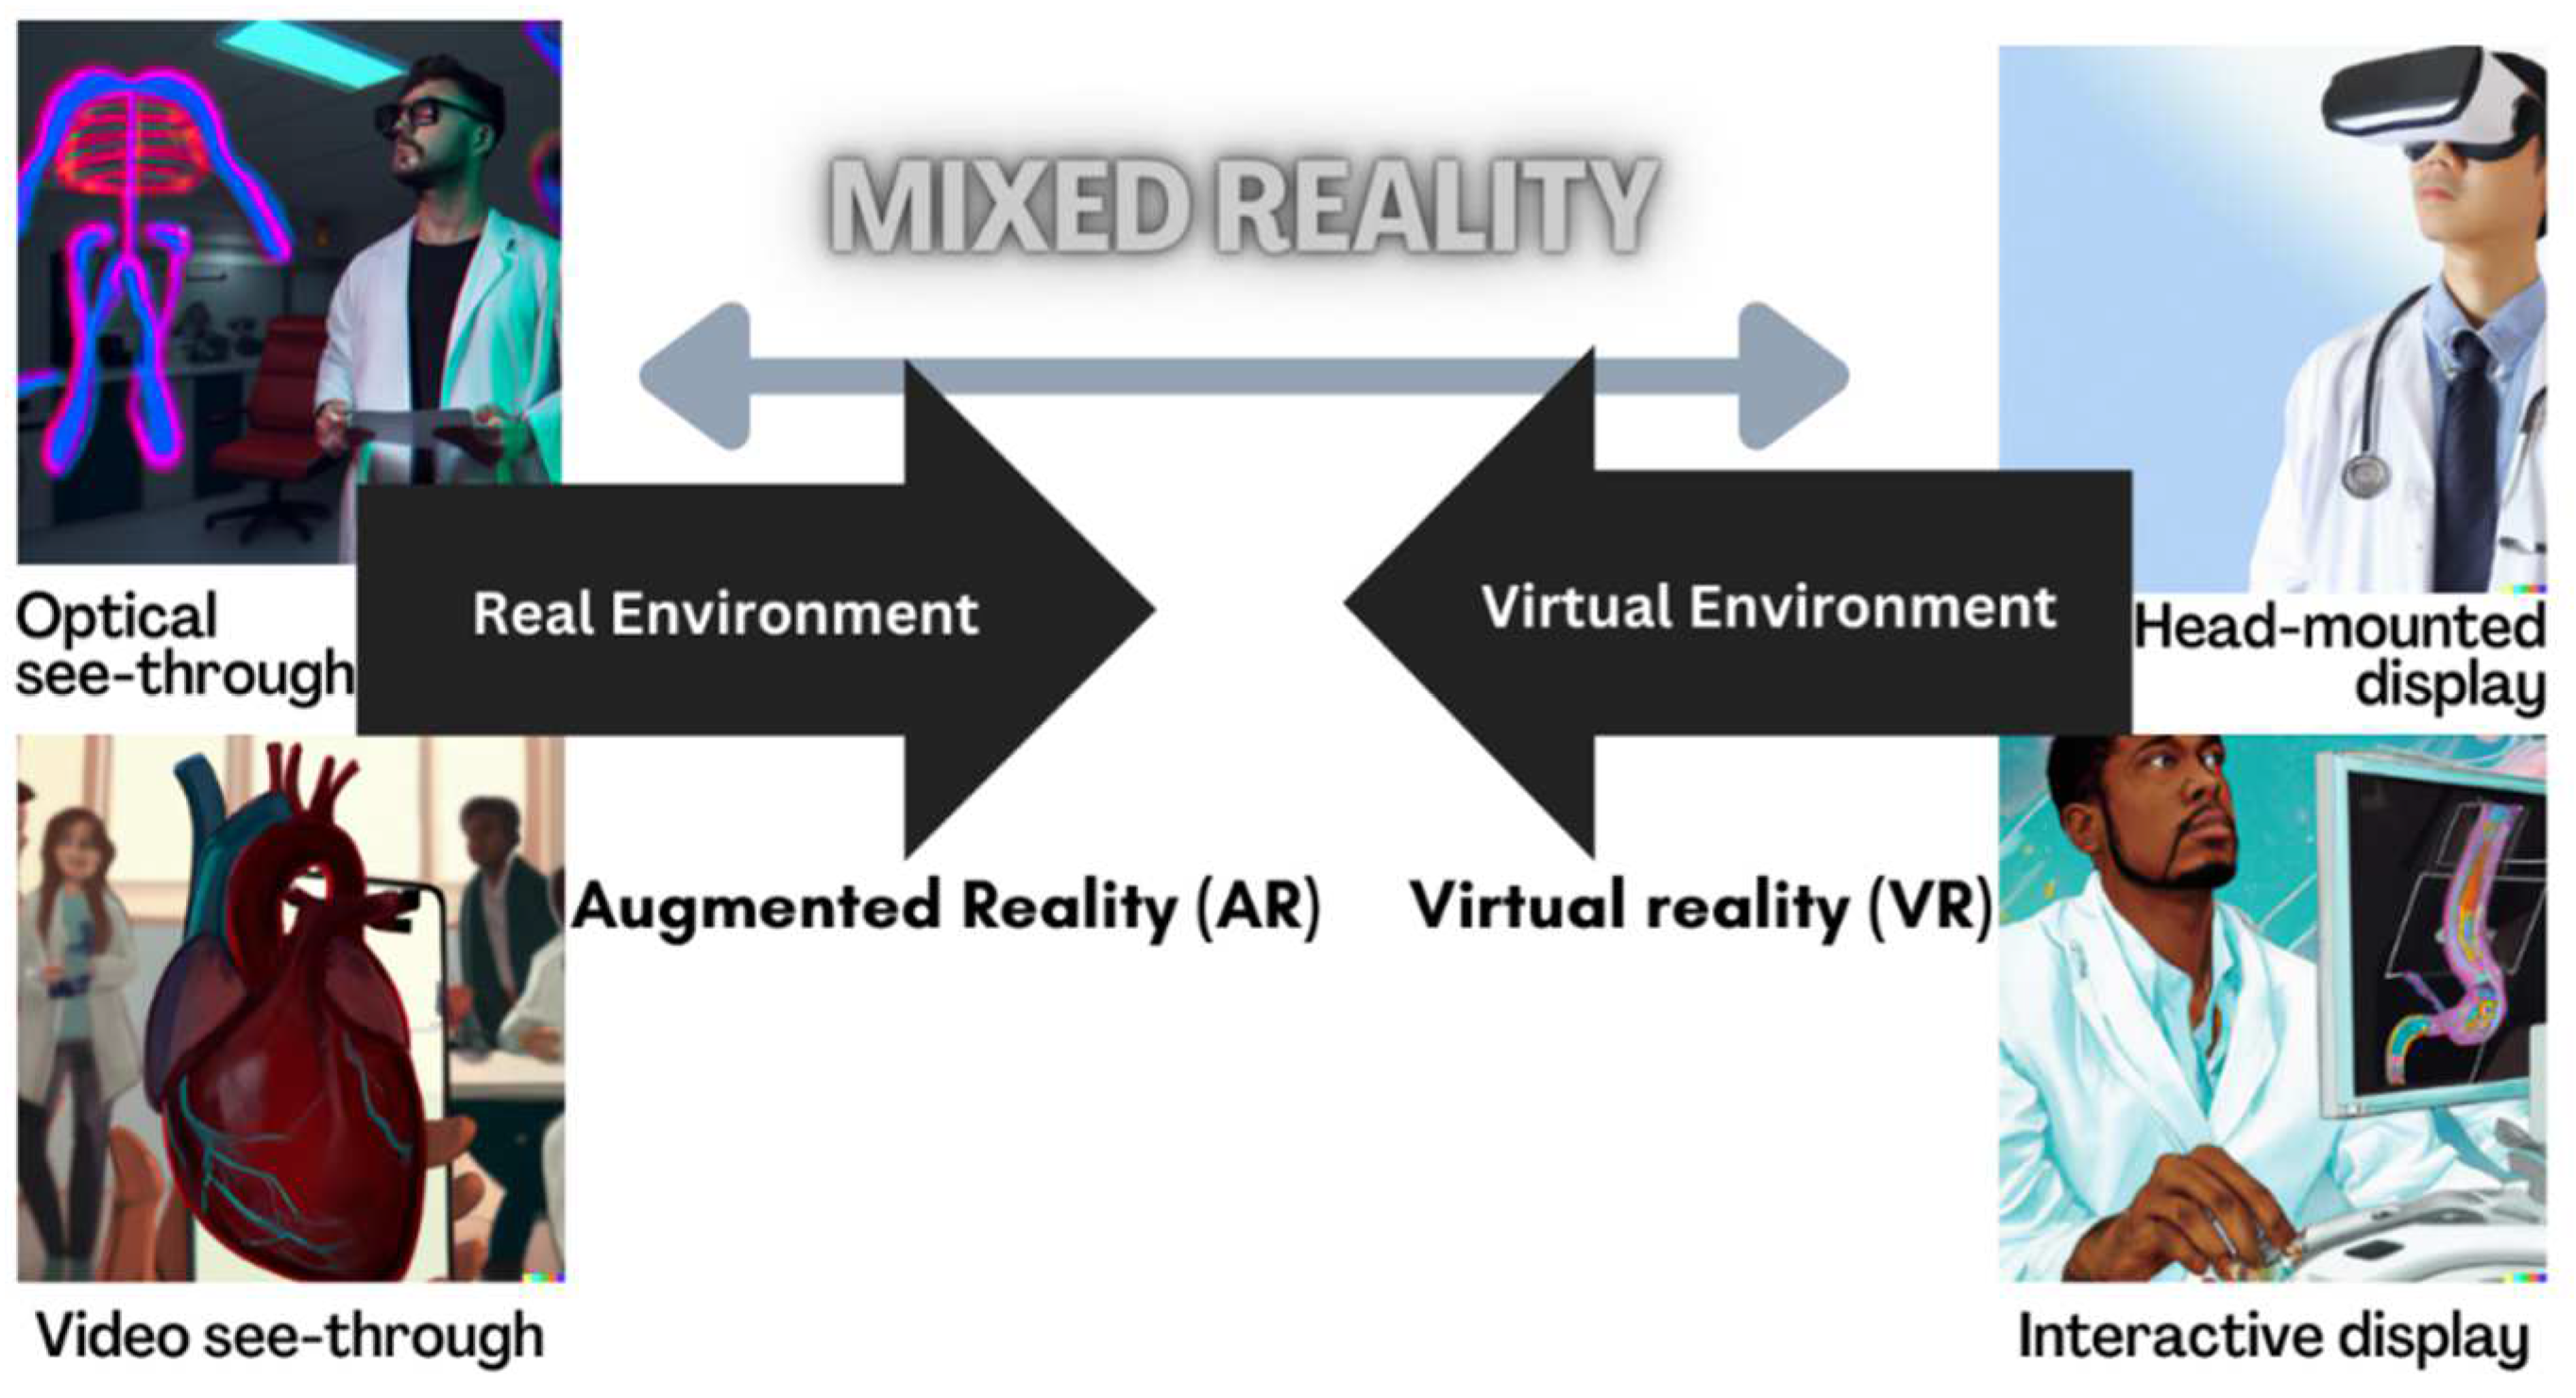 Effect of virtual reality guidance system on the overhaul teaching - Yang -  2022 - Computer Applications in Engineering Education - Wiley Online Library